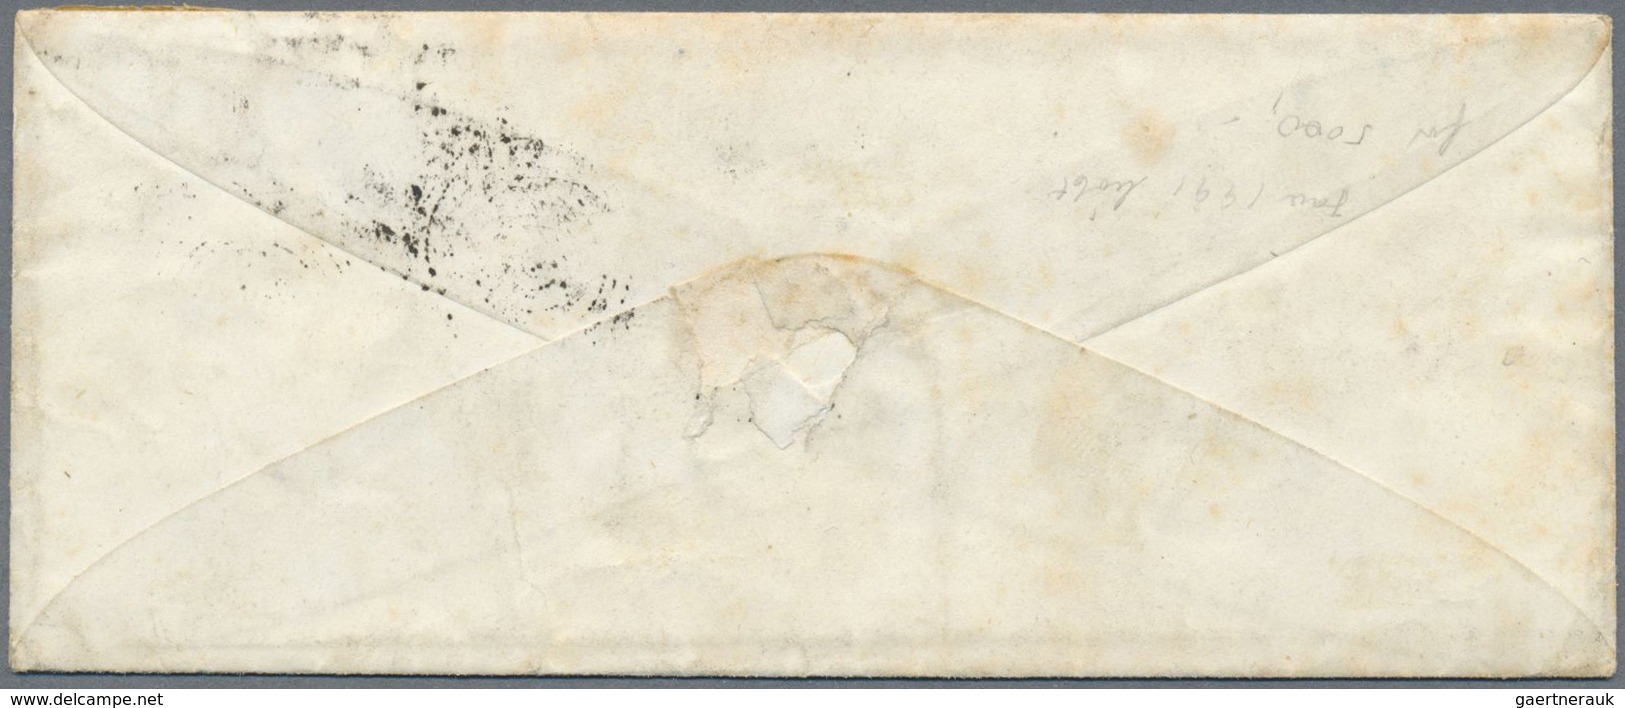 Br Dänemark - Stempel: 1856, Extremly Rare MUTE 5-RING CANCEL (stummer 5-Ring Stempel) On Small Cover. - Machines à Affranchir (EMA)